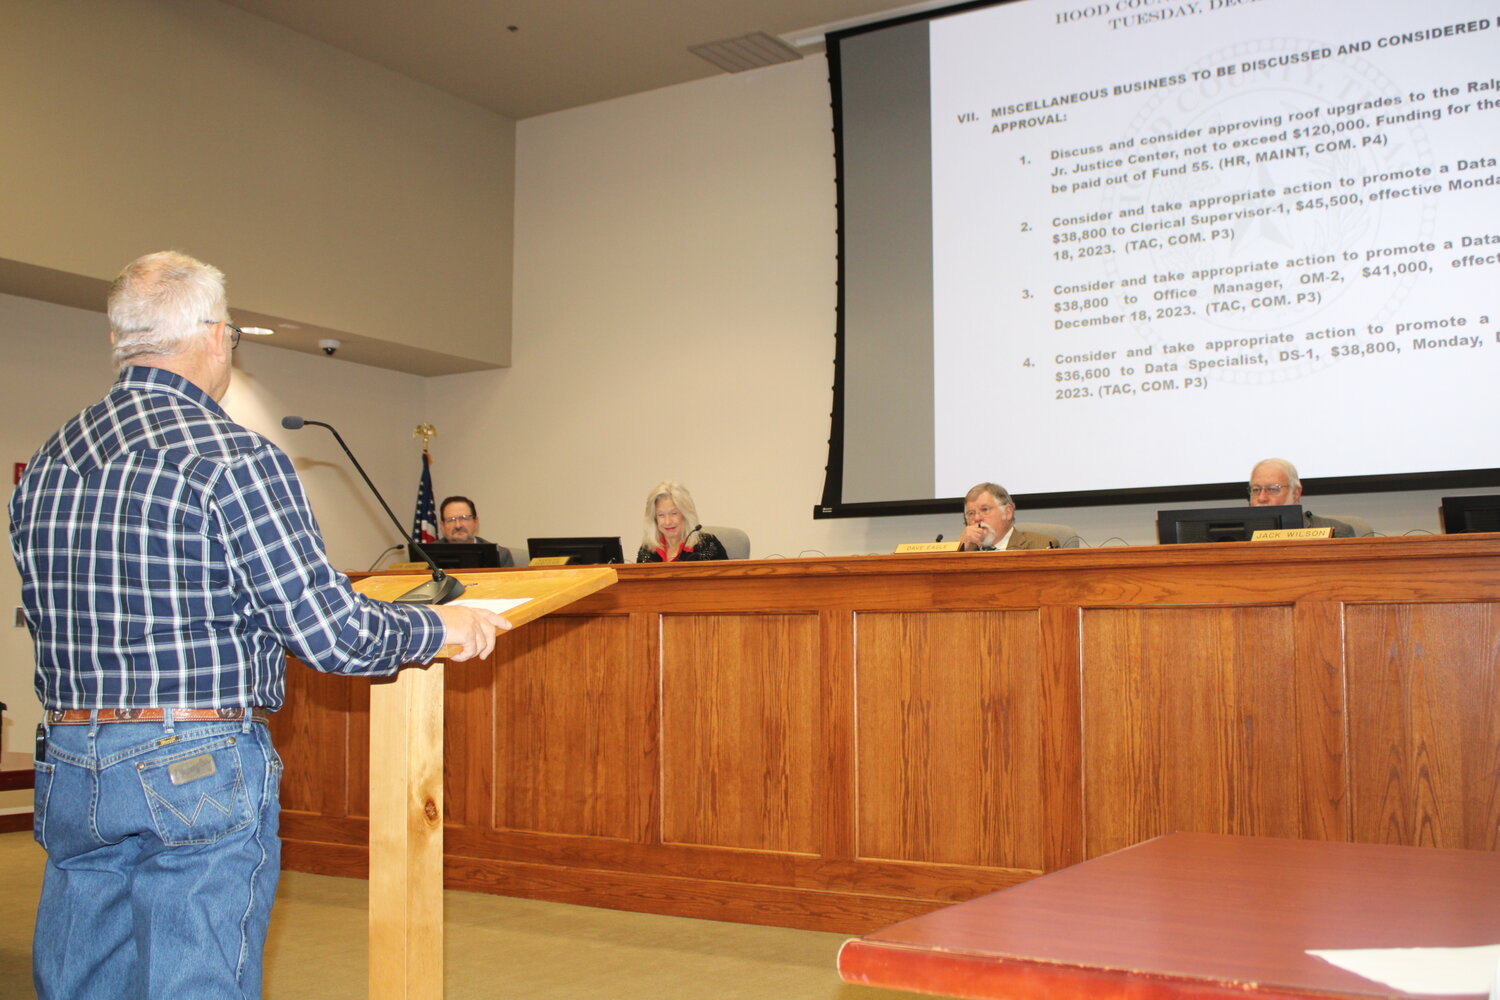 Hood County Maintenance Director Jay Riley, left, speaks to the Hood County Commissioners Court on Dec. 22, as he explains the need for roofing upgrades on the Ralph H. Walton Jr. Justice Center.